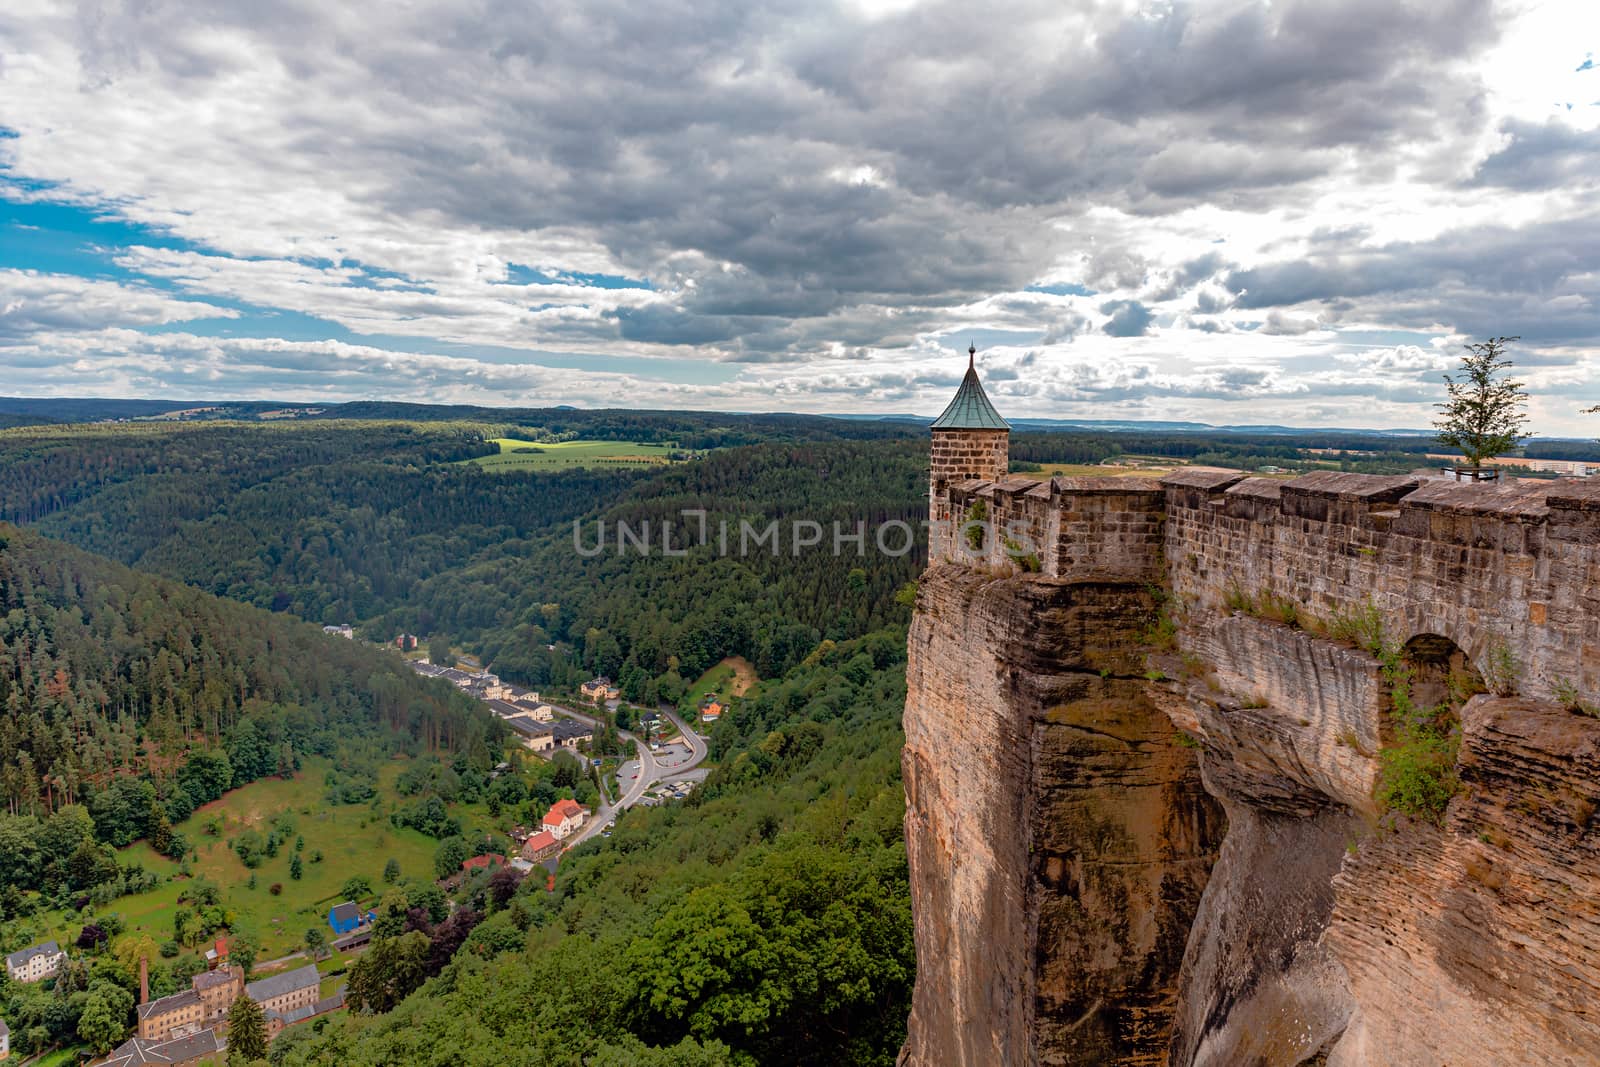 Elbe Sandstone Mountains - Königstein Fortress, one of the largest mountain fortresses in Europe, defensive wall